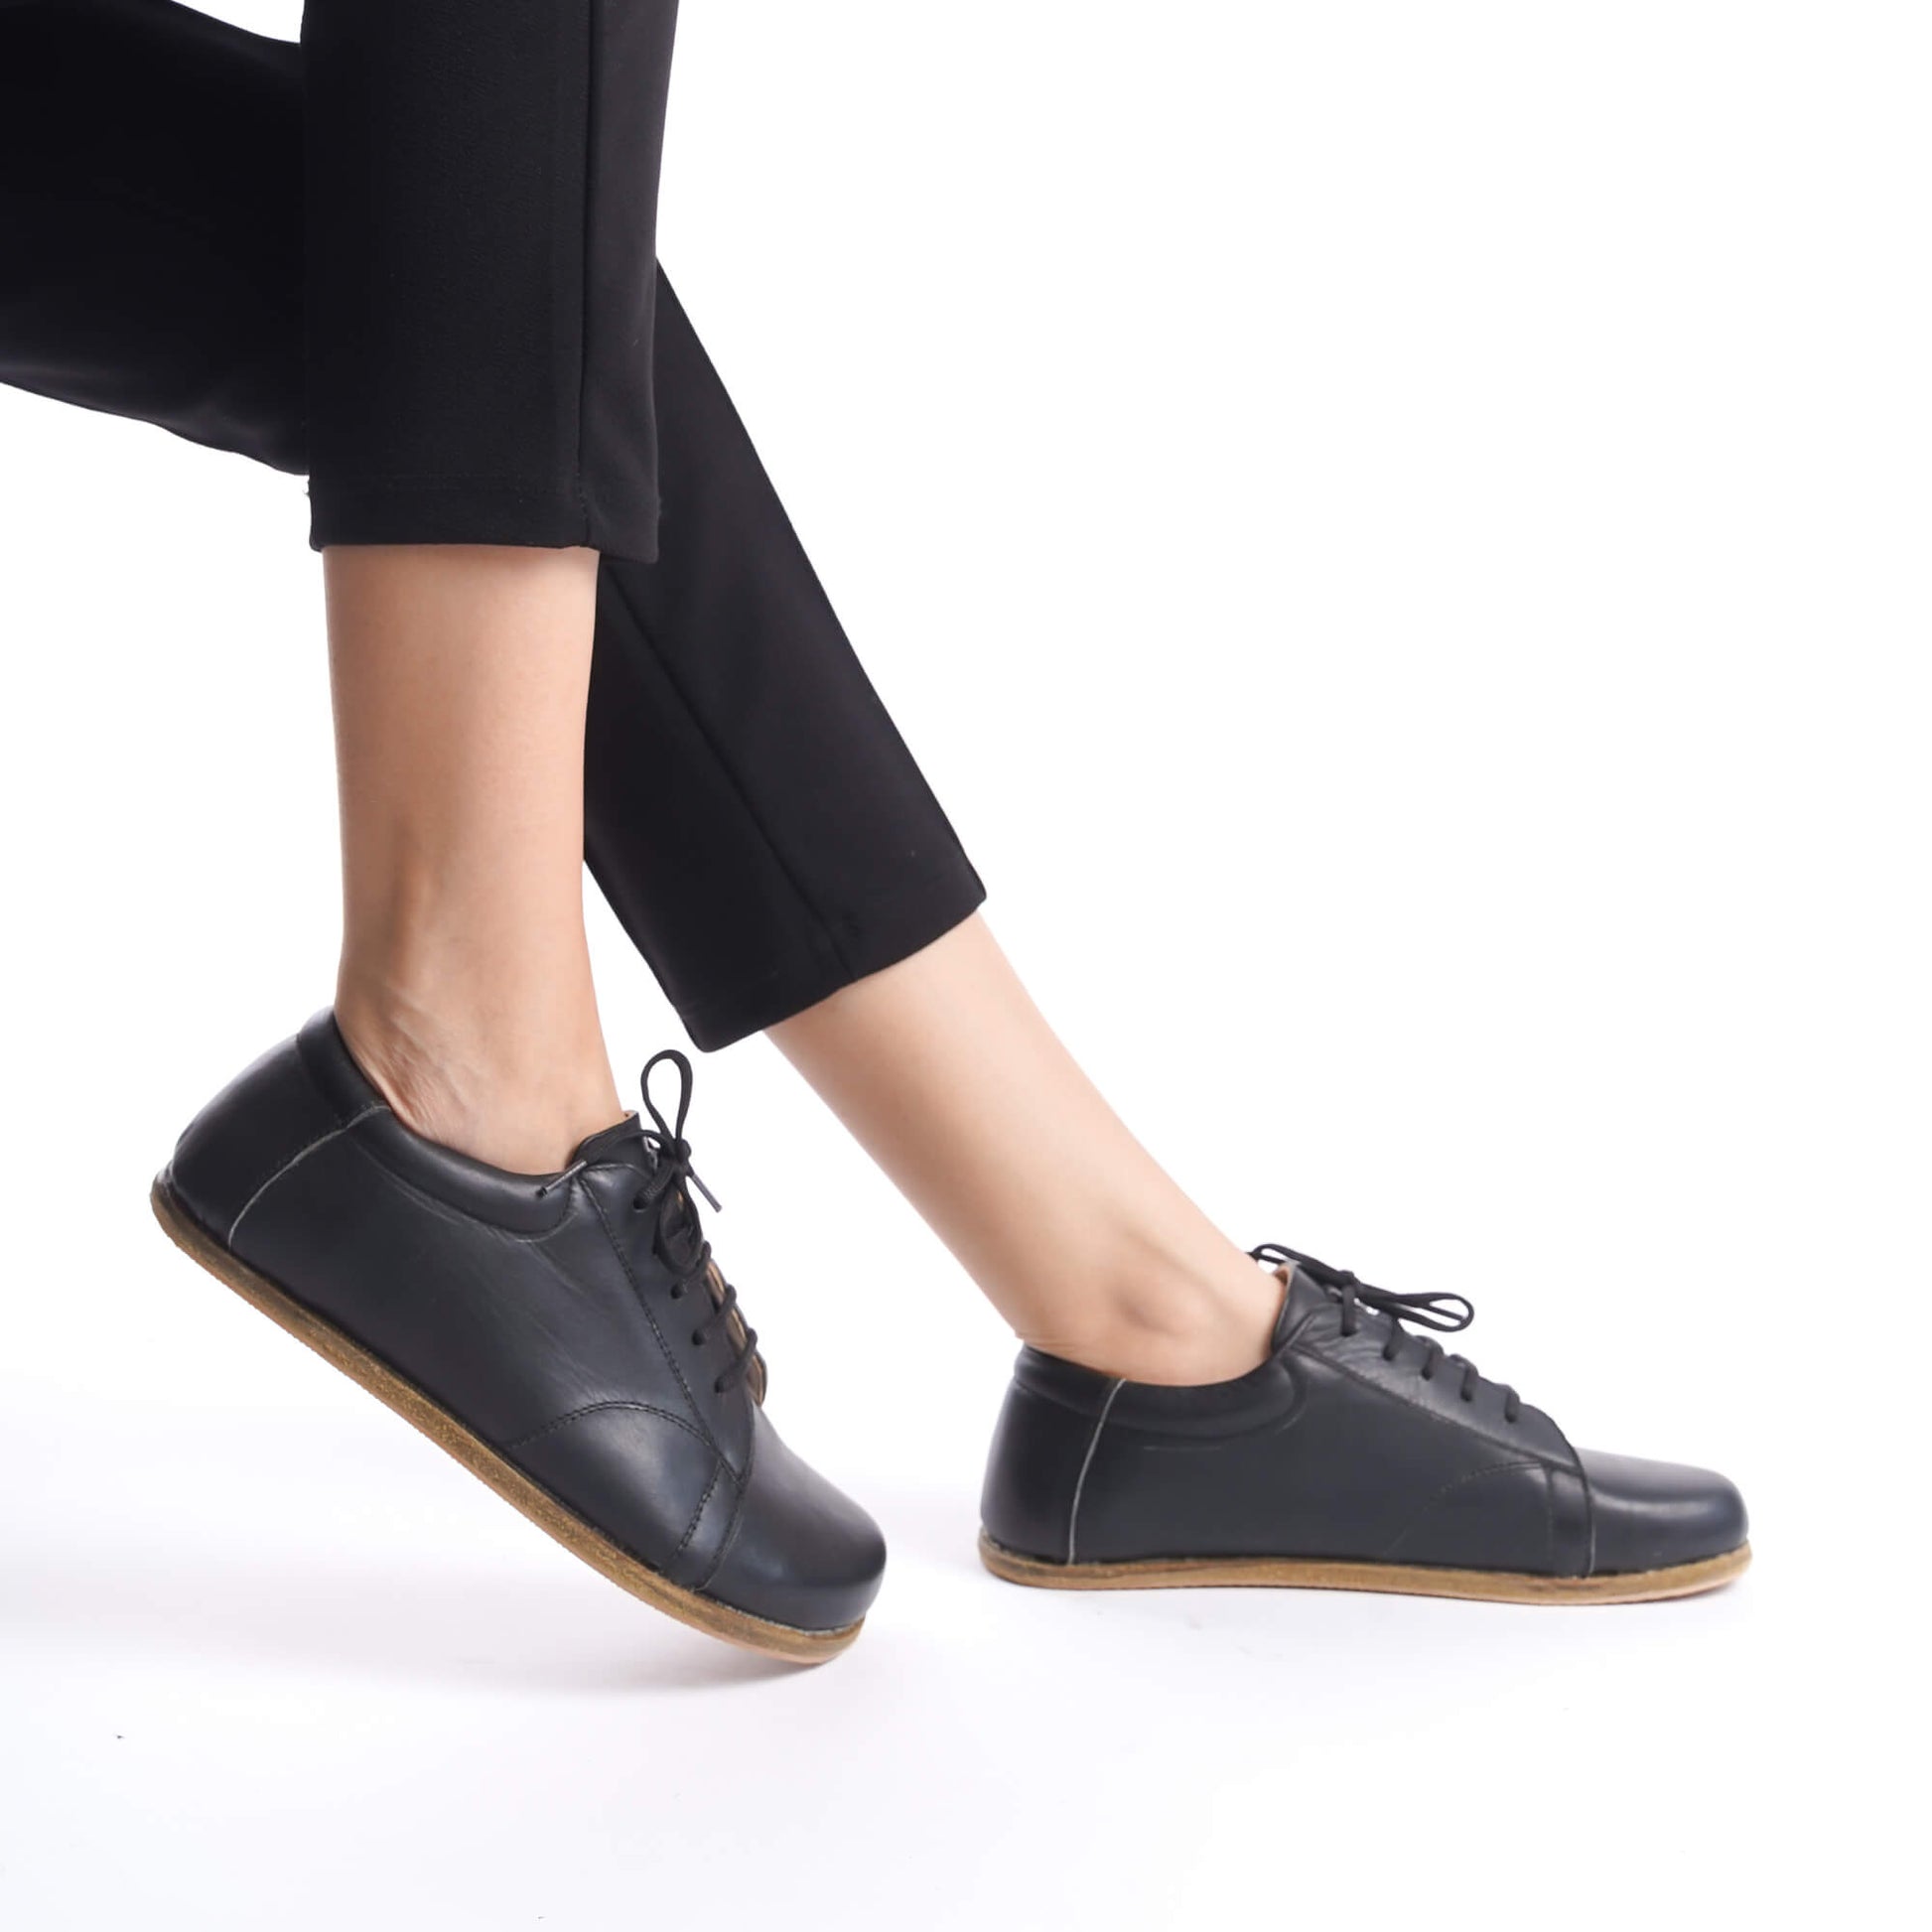 Model wearing black Lydia Leather Barefoot Women's Sneakers, demonstrating flexibility and minimalist design.